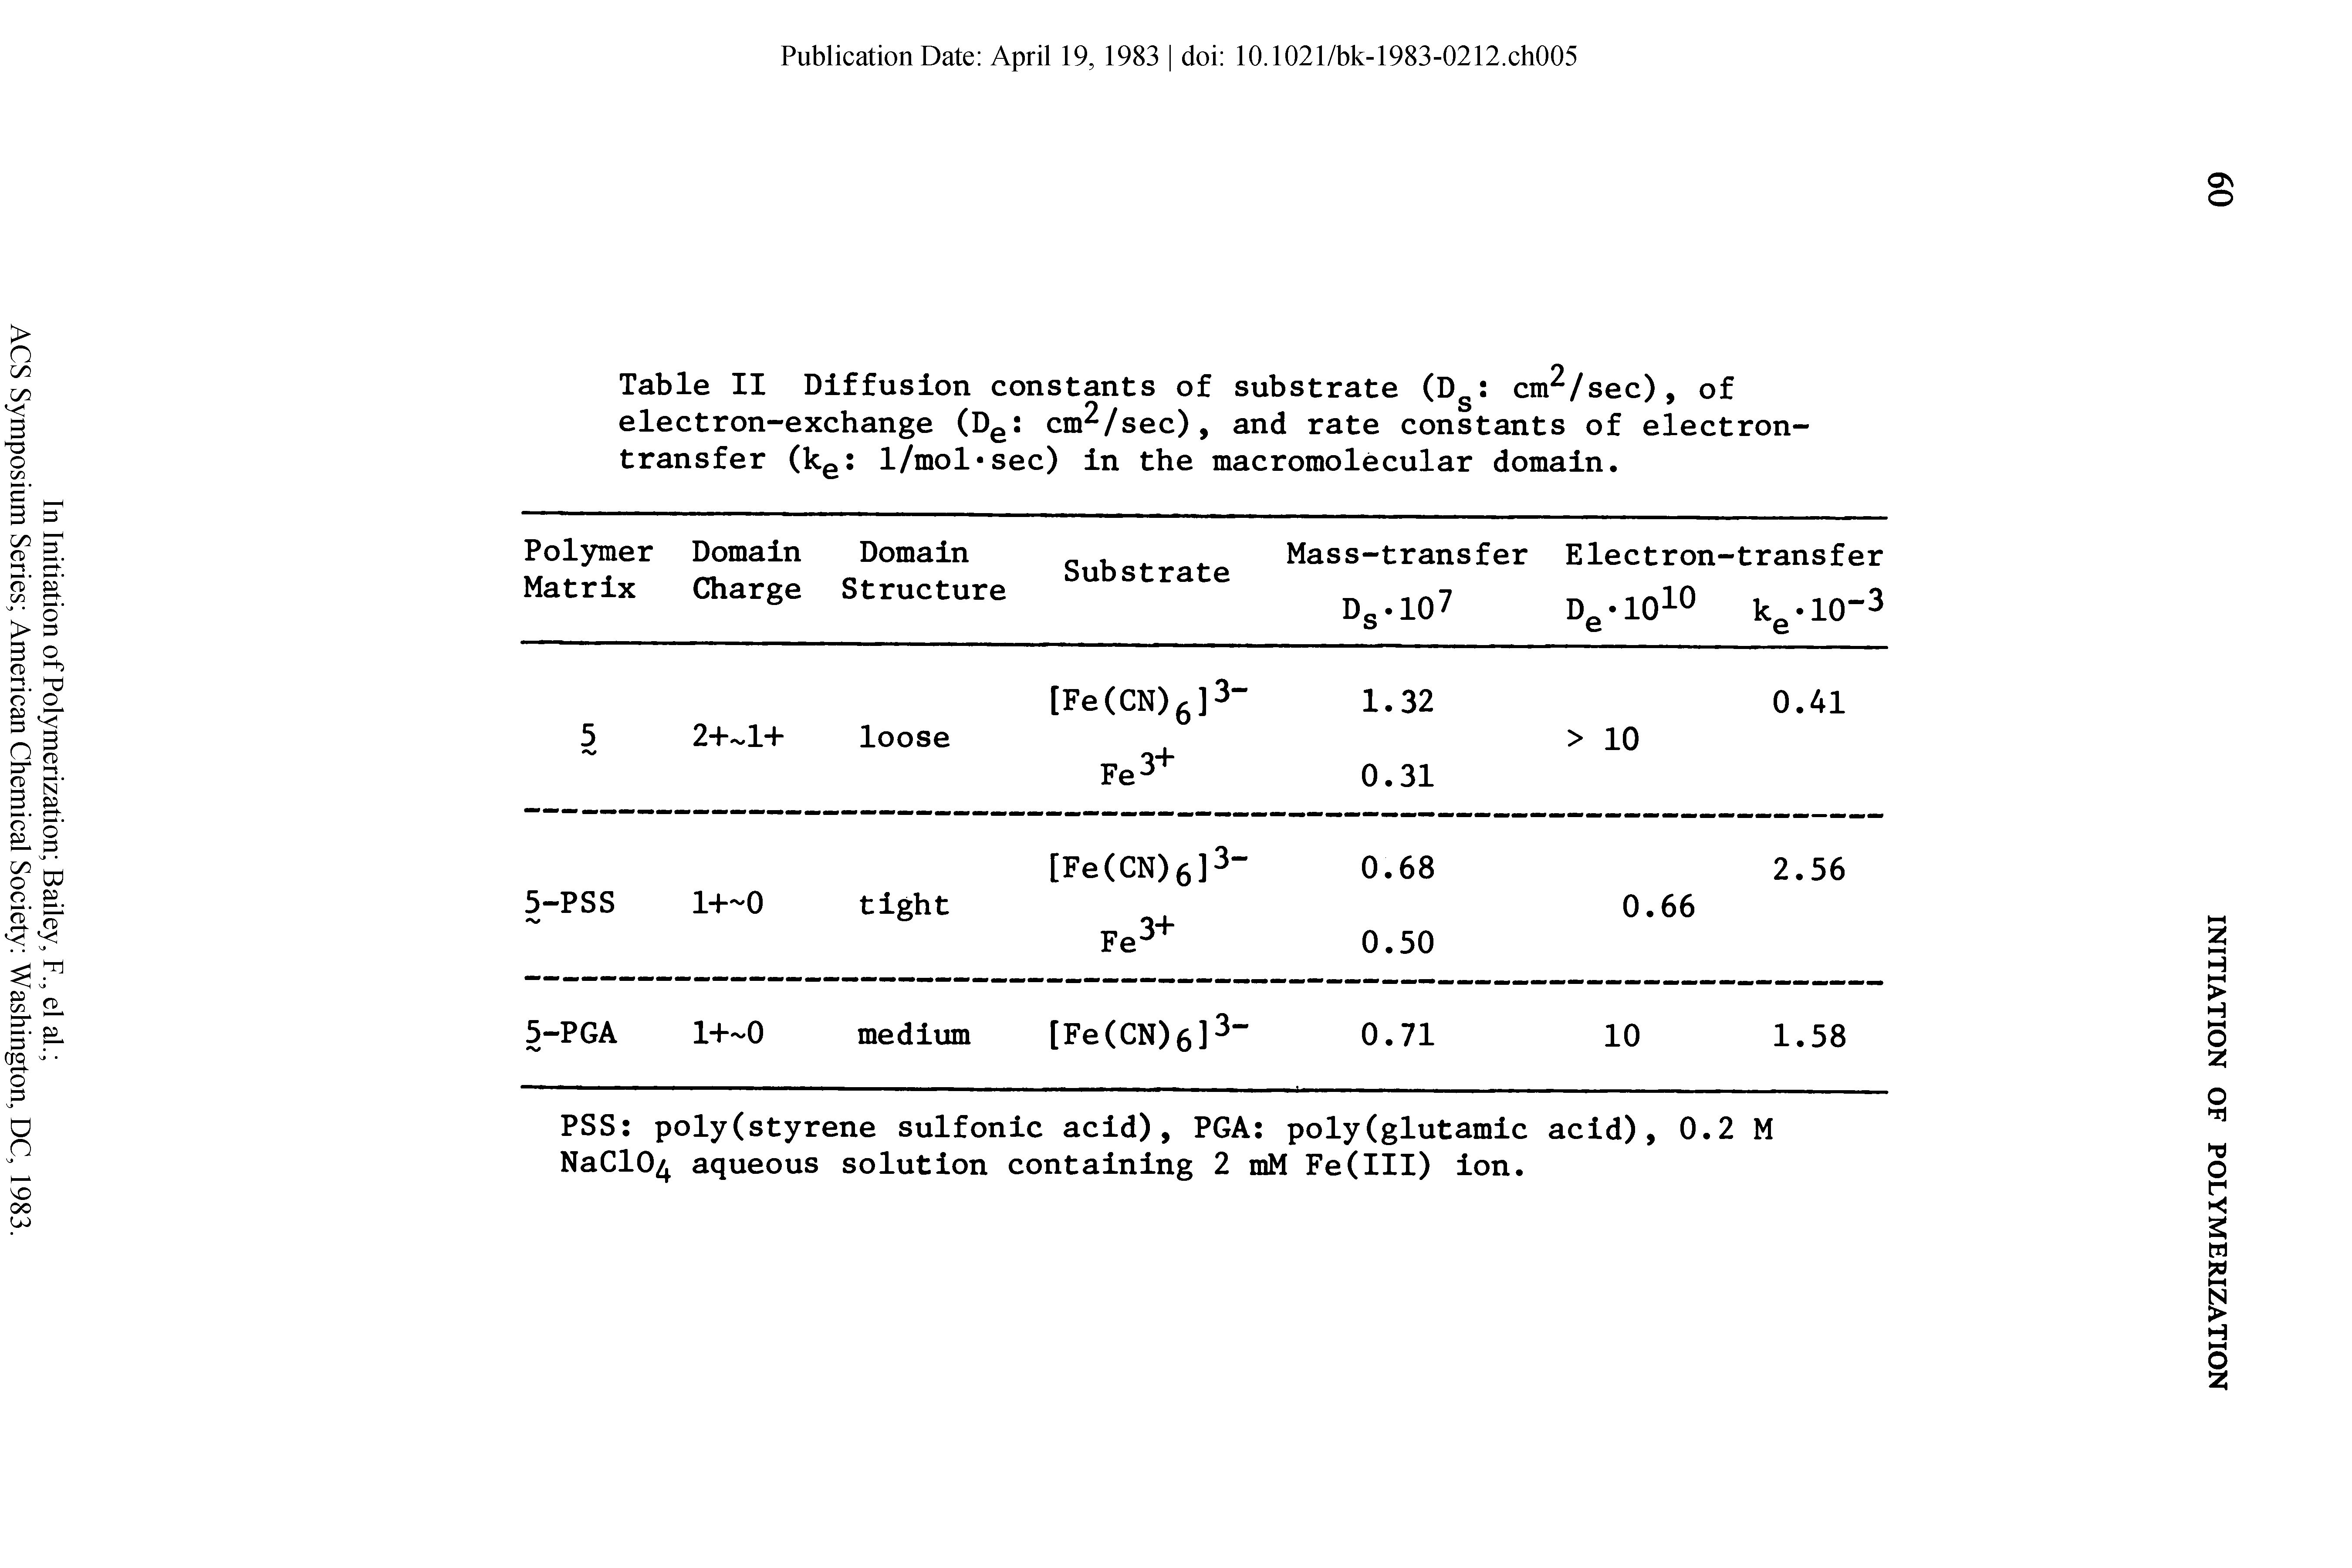 Table II Diffusion constants of substrate (D cm /sec), of electron-exchange (D cm /sec), and rate constants of electron-transfer (kg 1/mol sec) in the macromolecular domain.